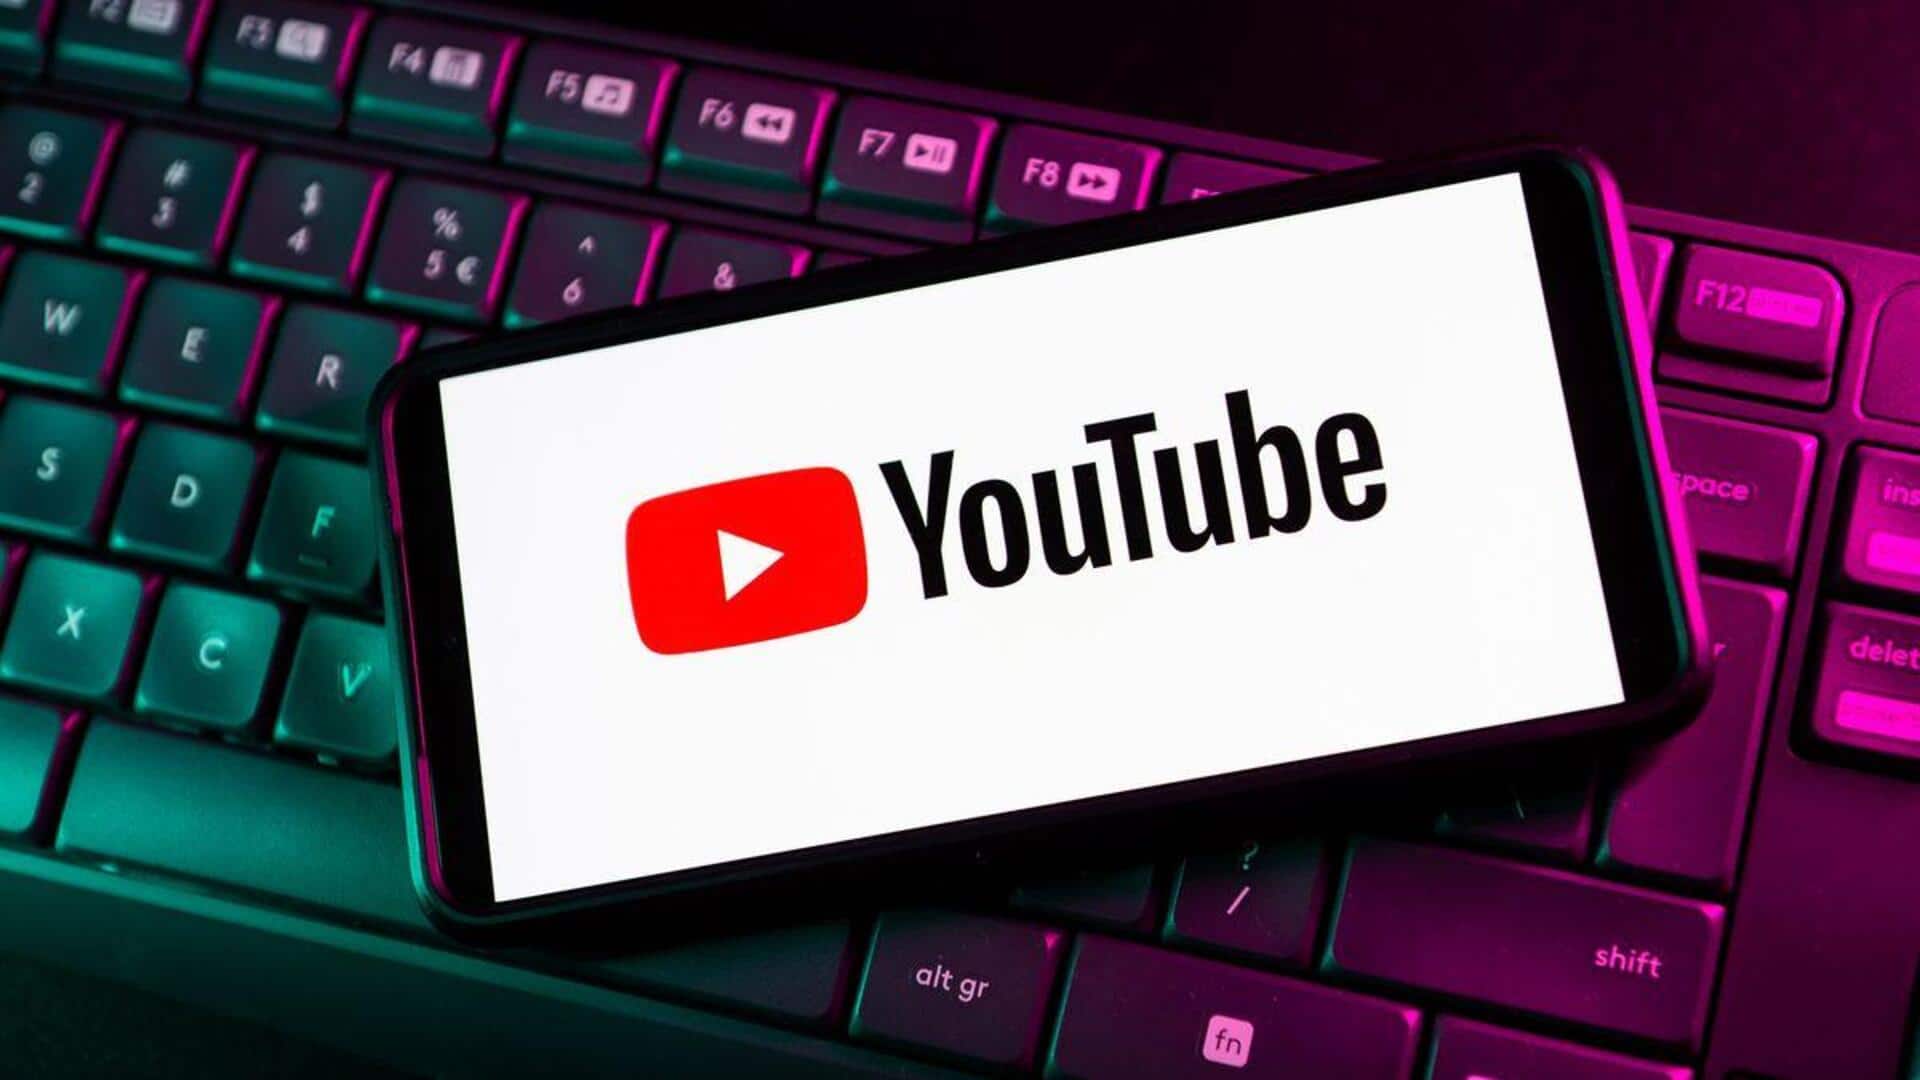 YouTube rolls out Cast menu redesign on iOS and Android